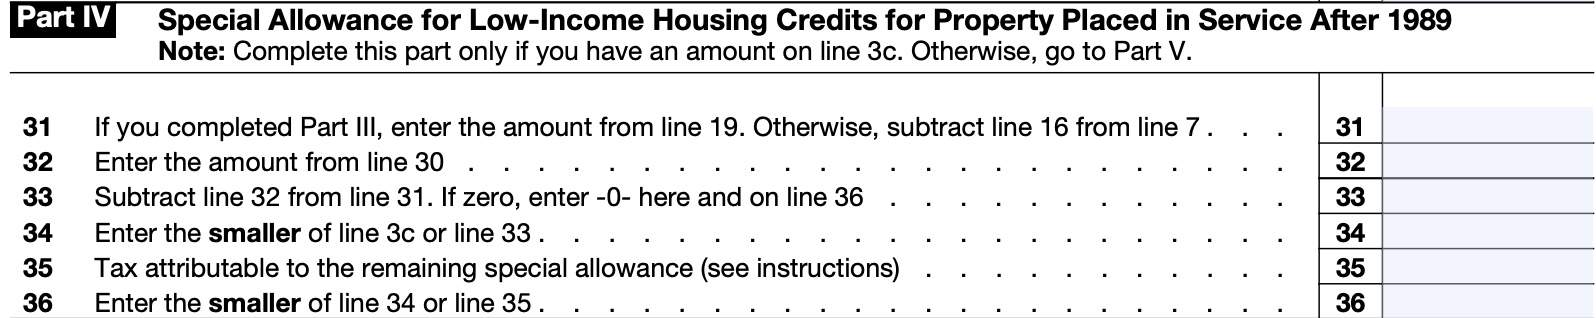 Part IV, special allowance for low-income housing credits for property placed in service after 1989